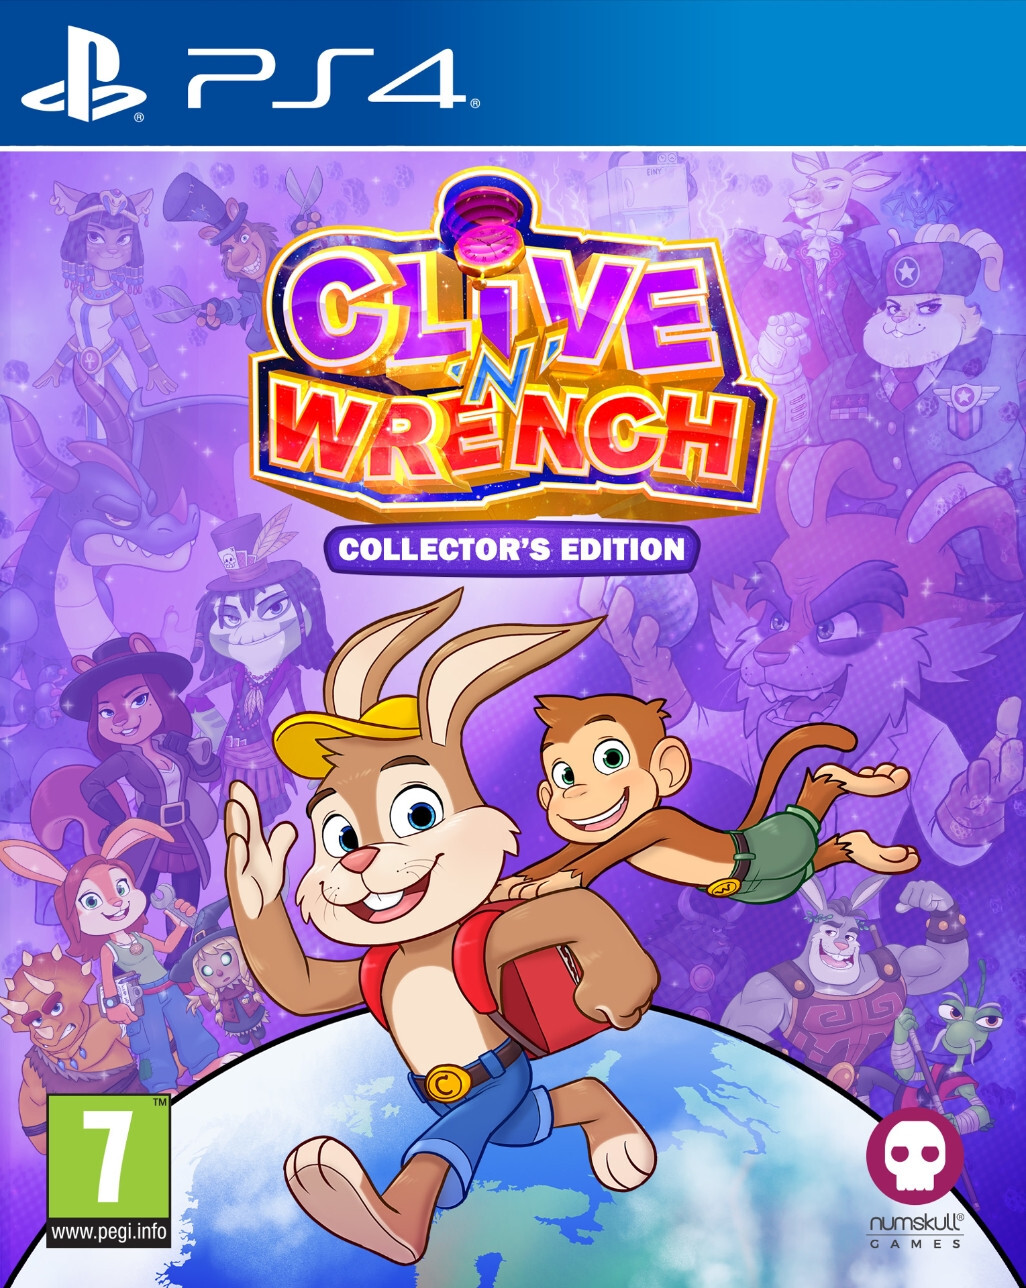 Numskull Clive 'n' Wrench Collector’s Edition PlayStation 4